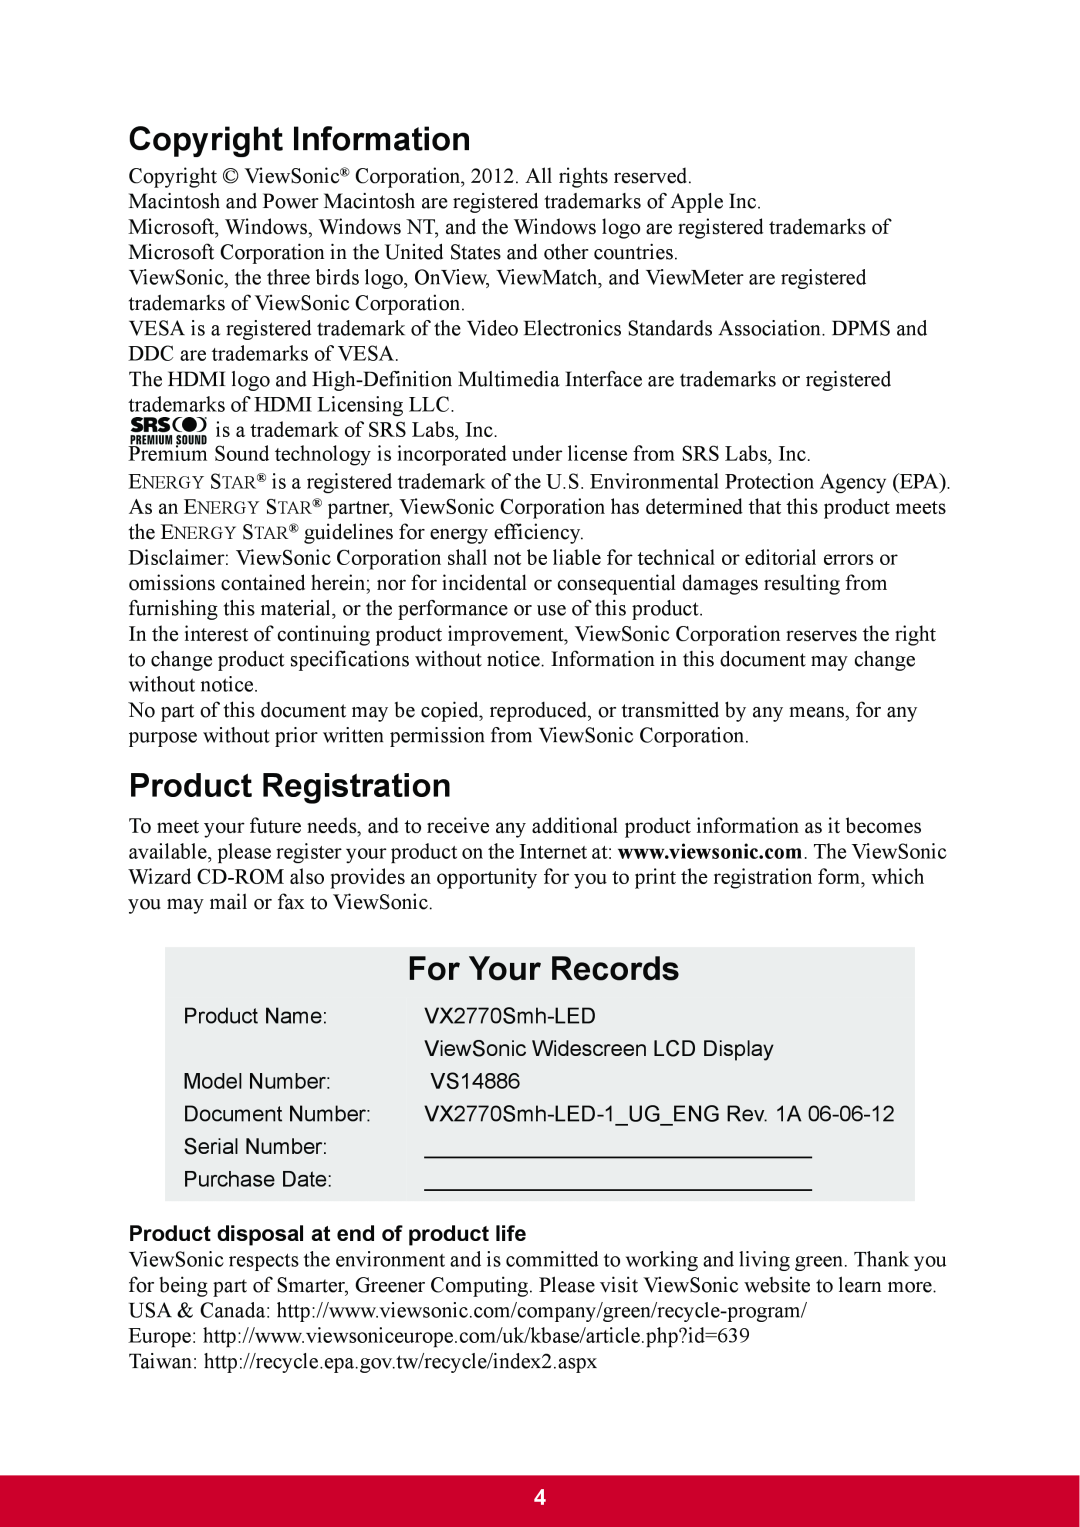 ViewSonic VX2770SMHLED warranty Copyright Information, Product Registration, For Your Records 